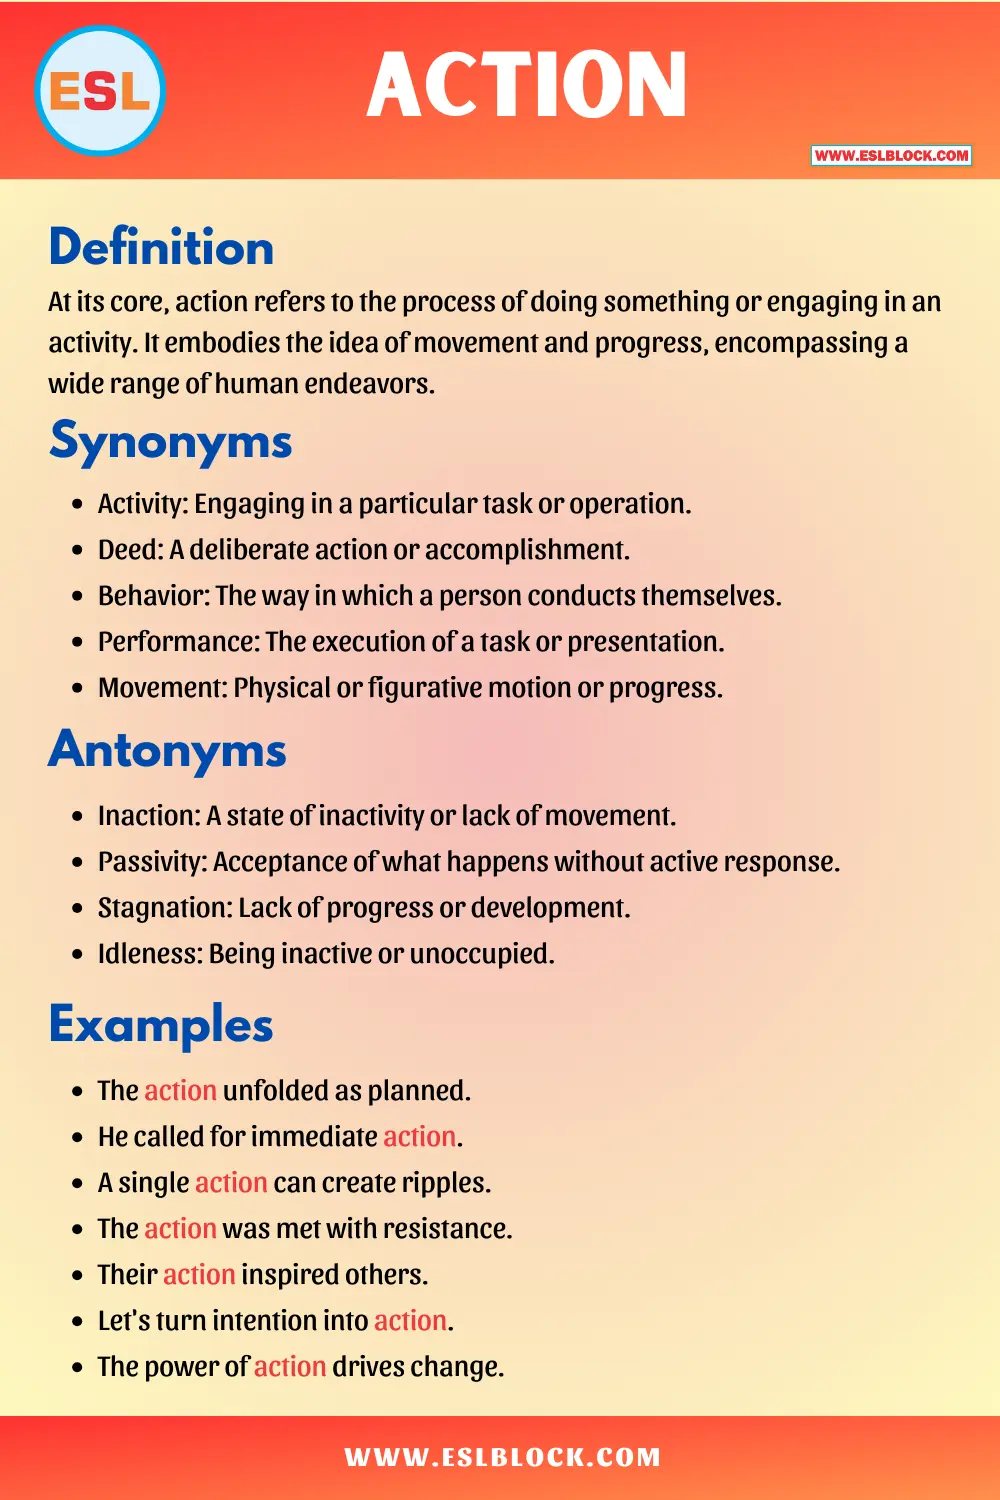 Action Synonyms, Antonyms, Meaning, Definition